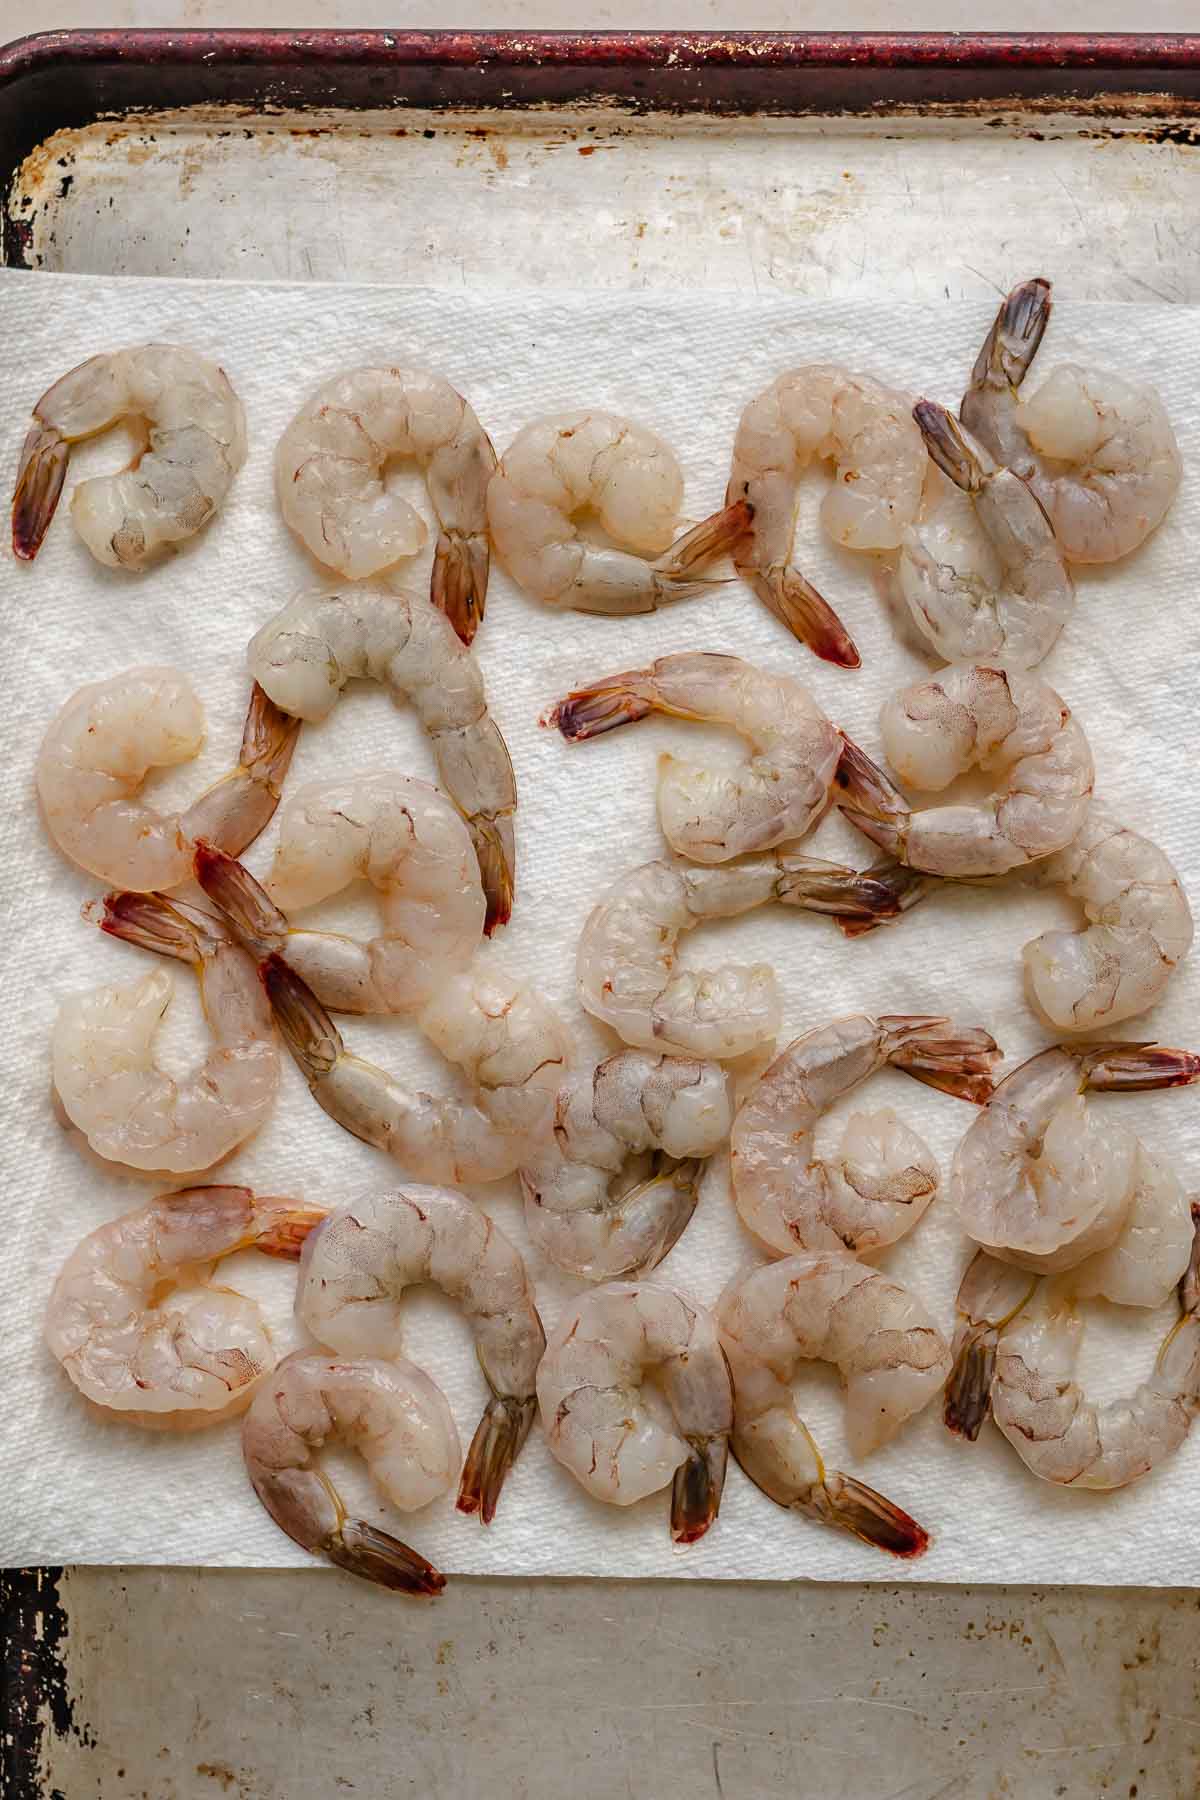 Raw, peeled shrimp on a paper towel with tails on.